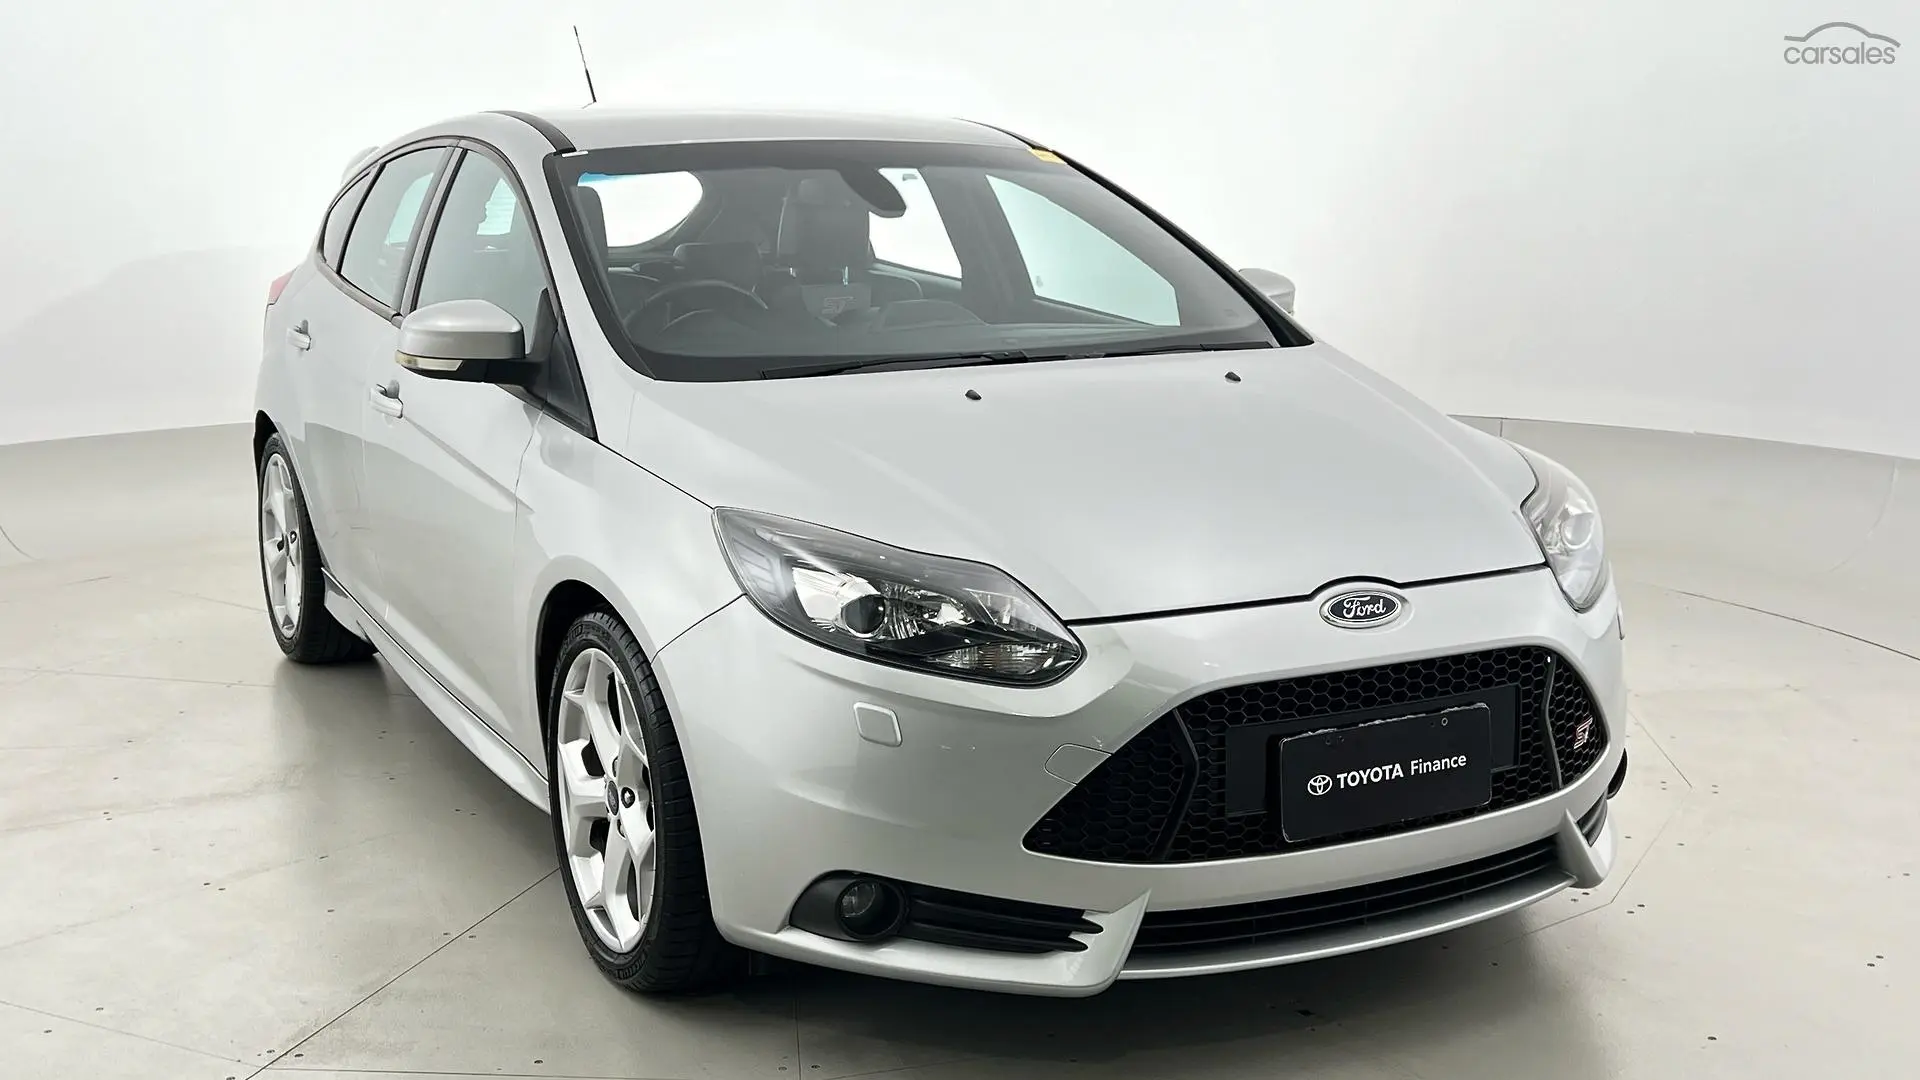 2013 Ford Focus Image 11